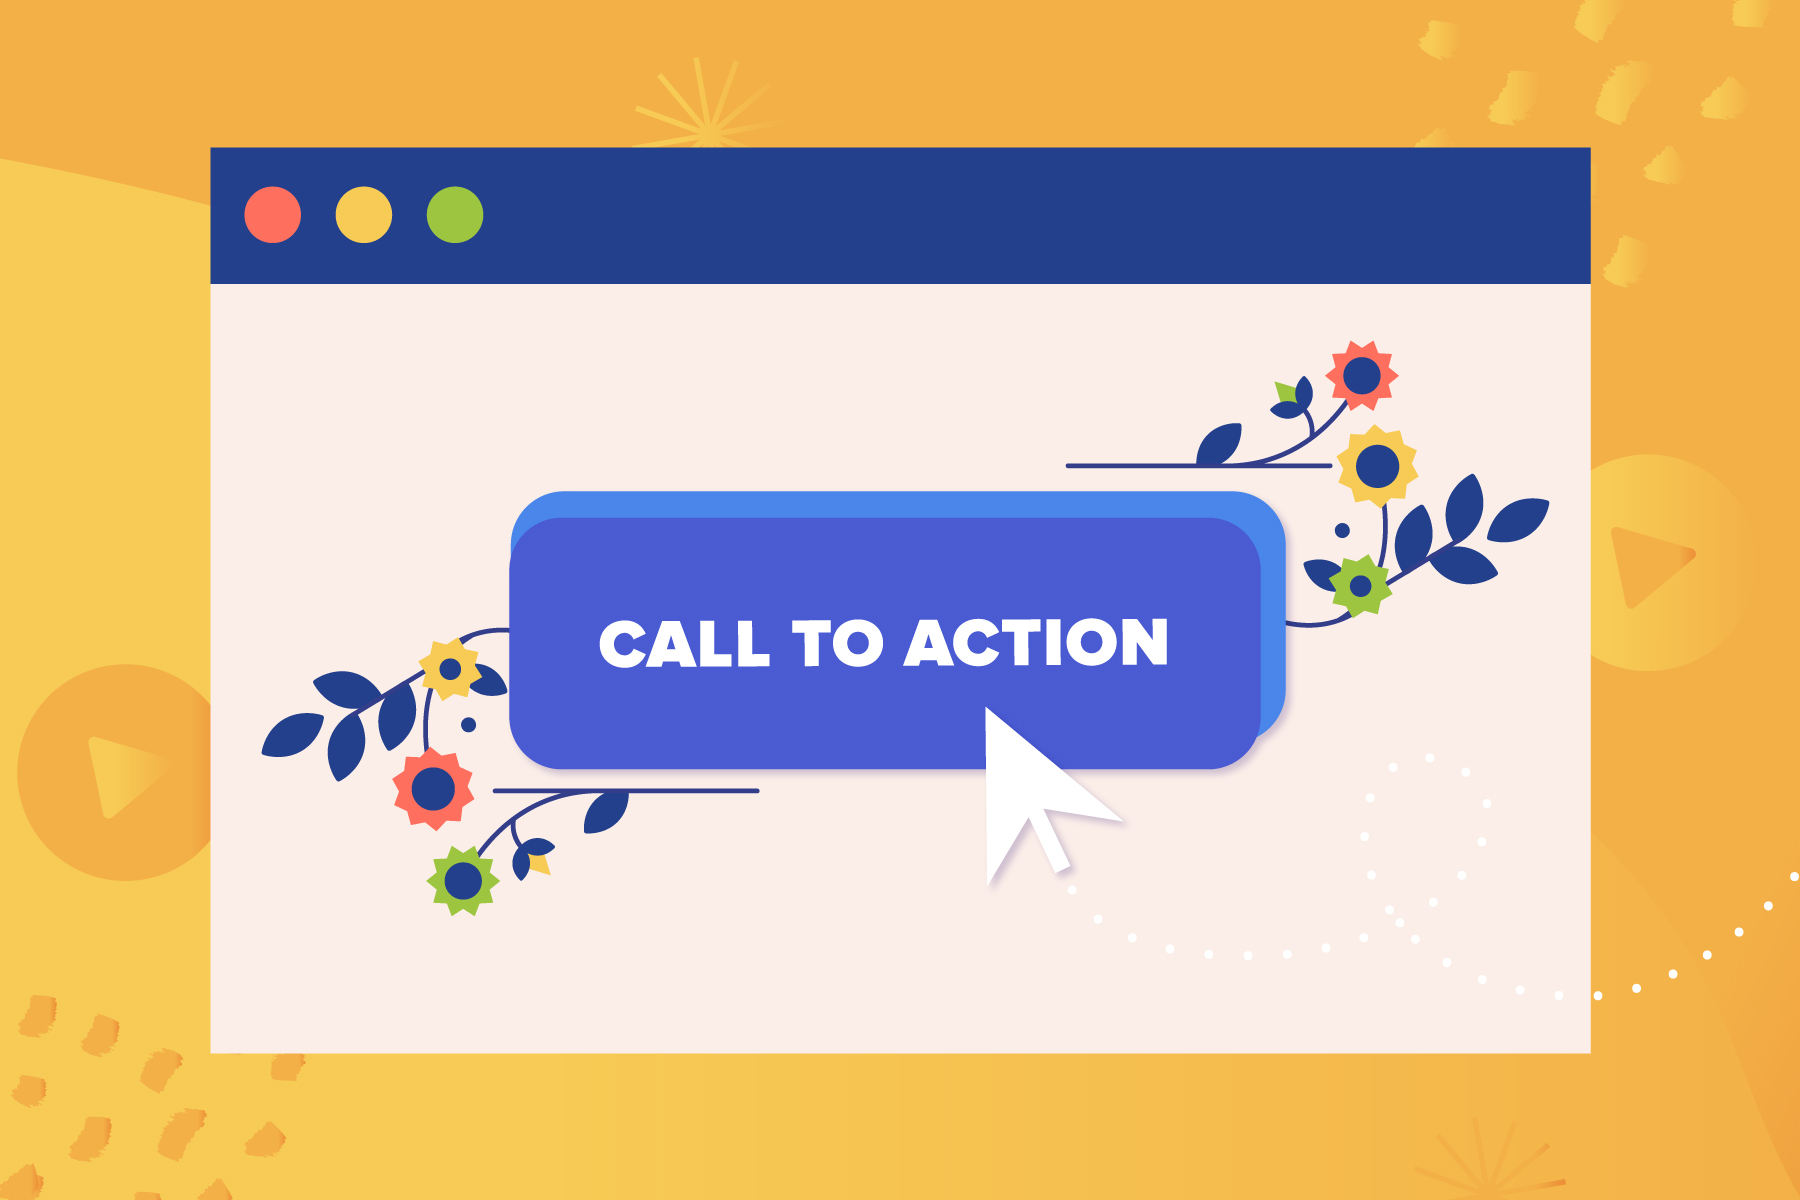 What is a call to action button